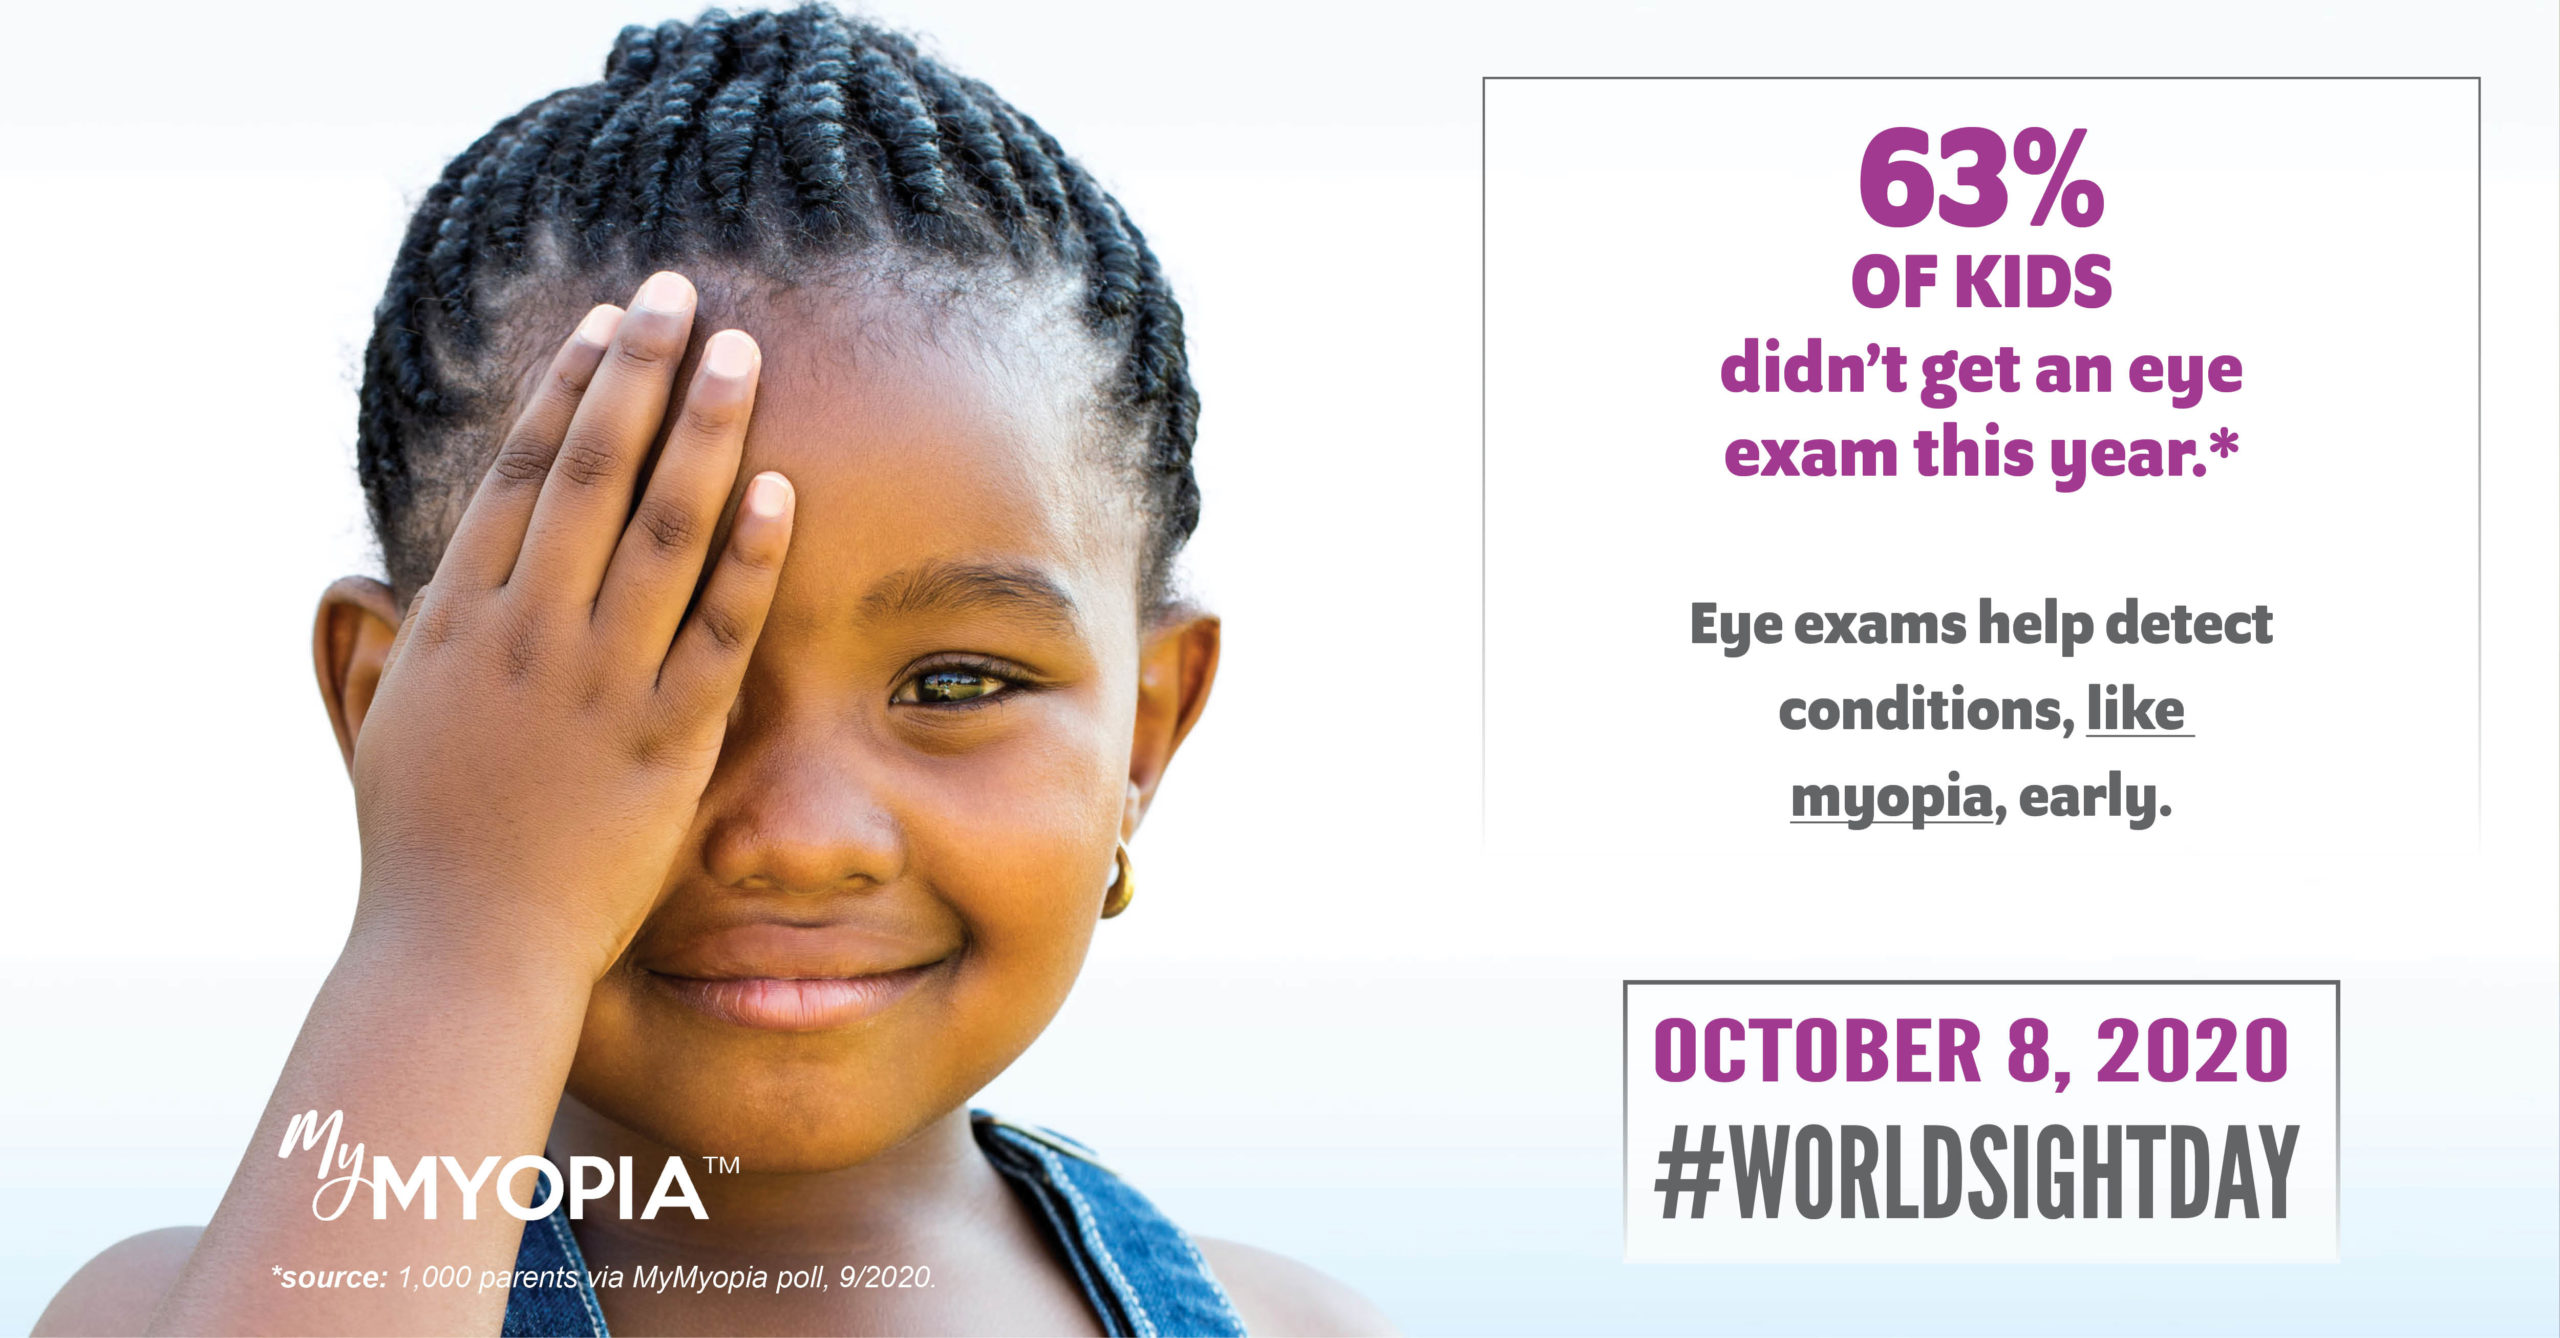 World Sight Day 2020 - 63% of kids didn't get an eye exam this year